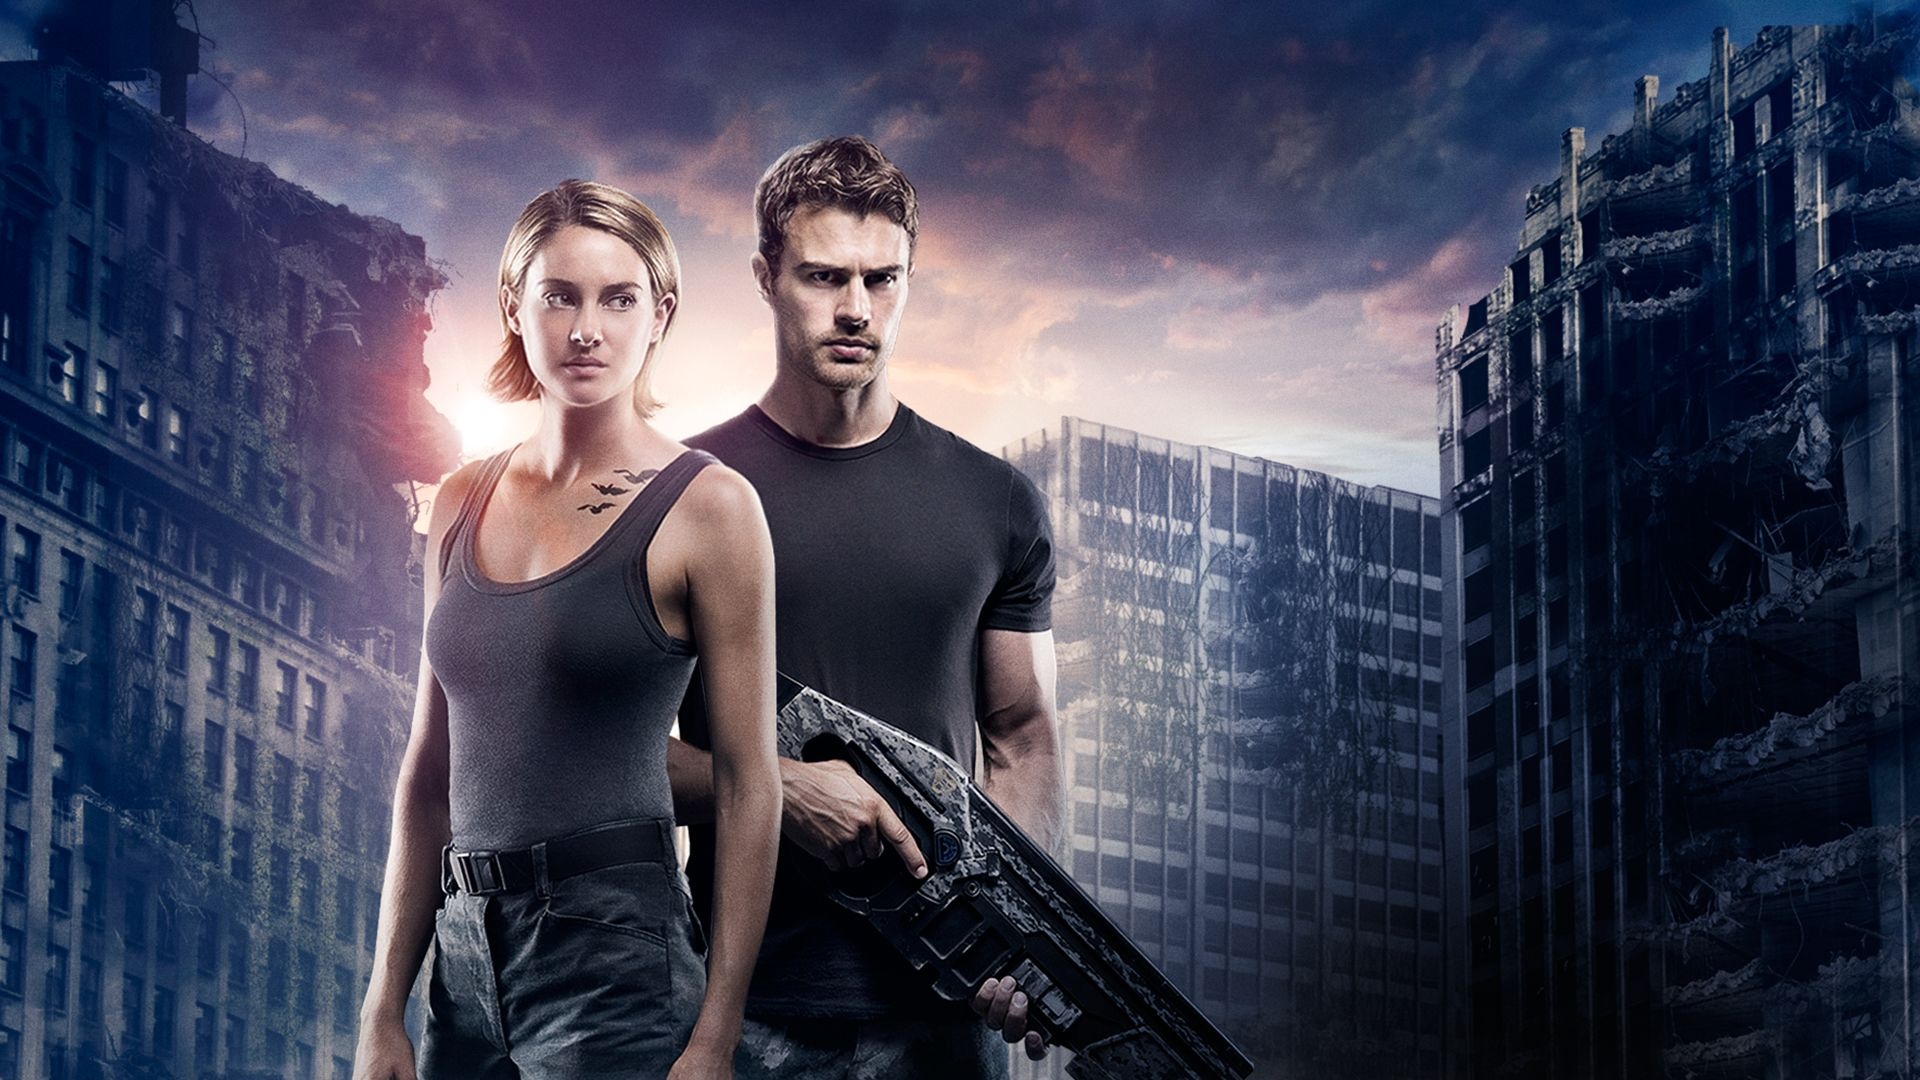 Four and Tris, Divergent movie, Top free wallpapers, Divergent backgrounds, 1920x1080 Full HD Desktop